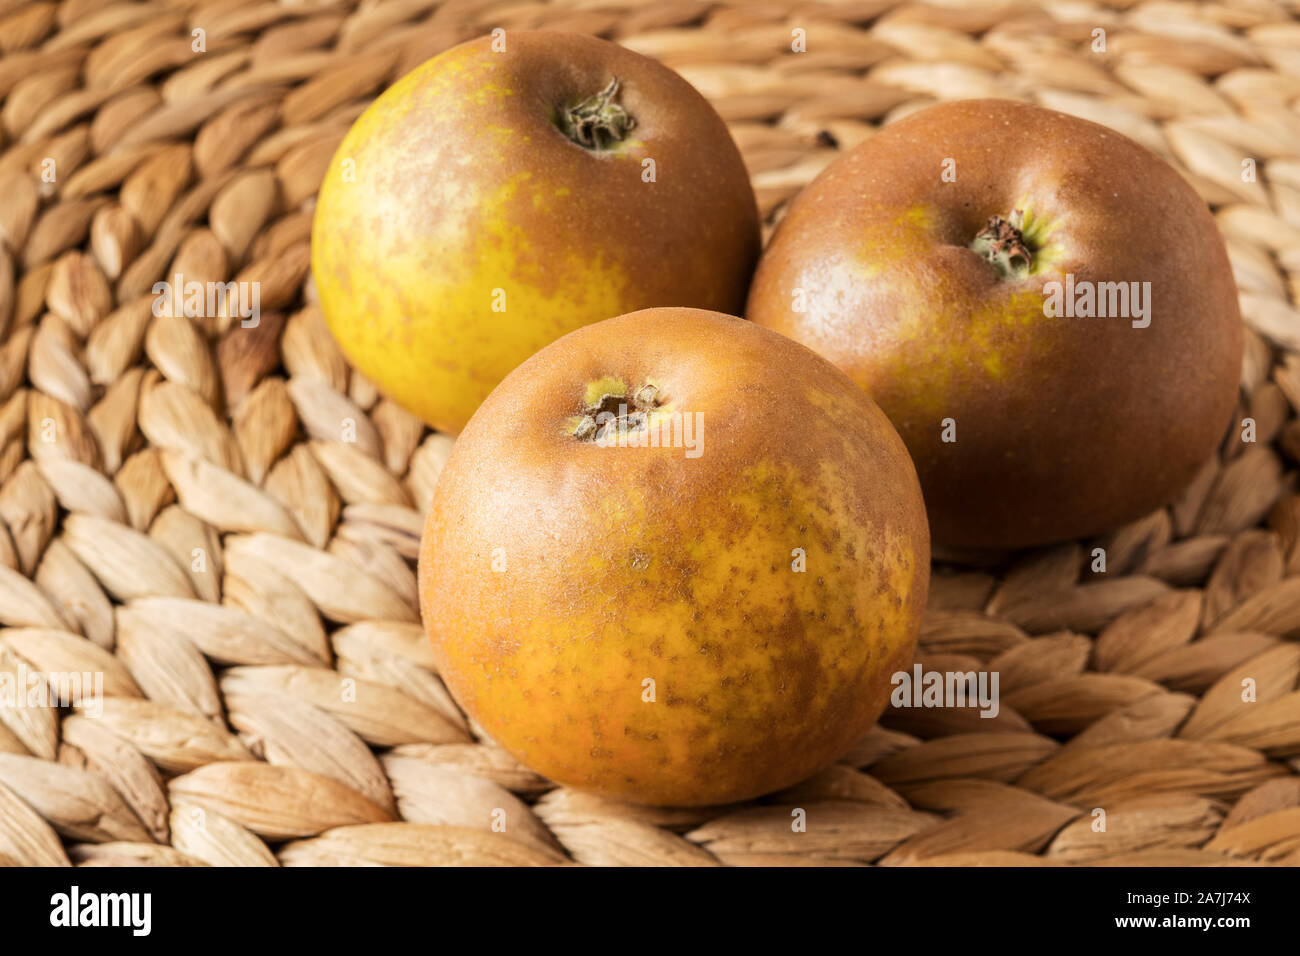 Three egremont russet apples on a banana leaf mat, in natural light. Stock Photo